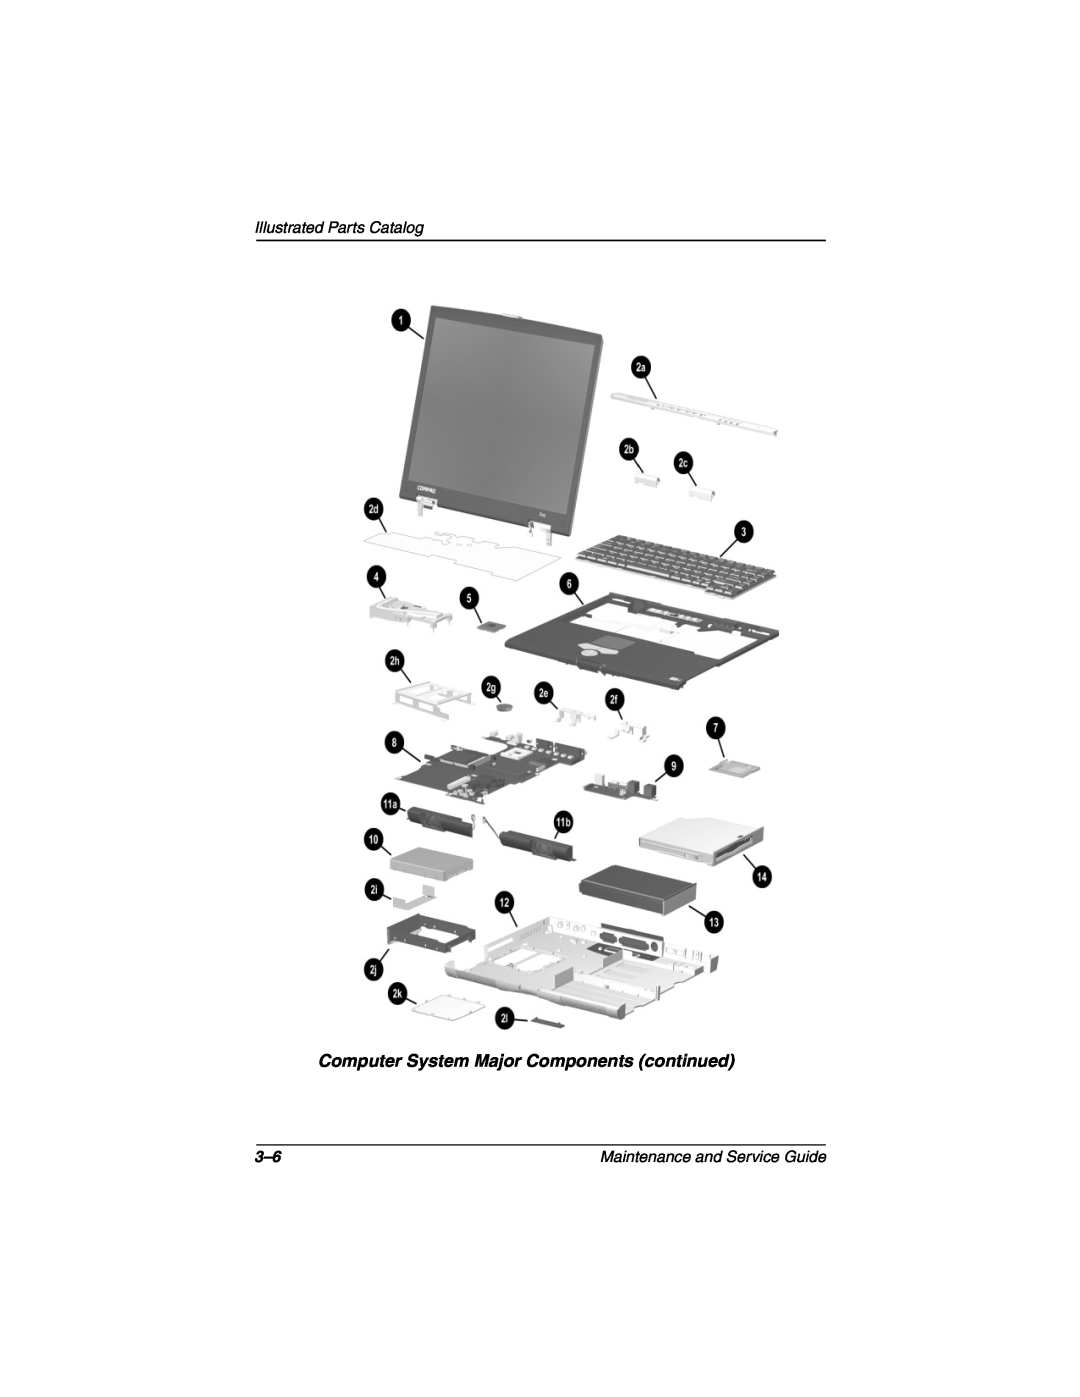 Compaq N160 manual Computer System Major Components continued, Illustrated Parts Catalog, Maintenance and Service Guide 